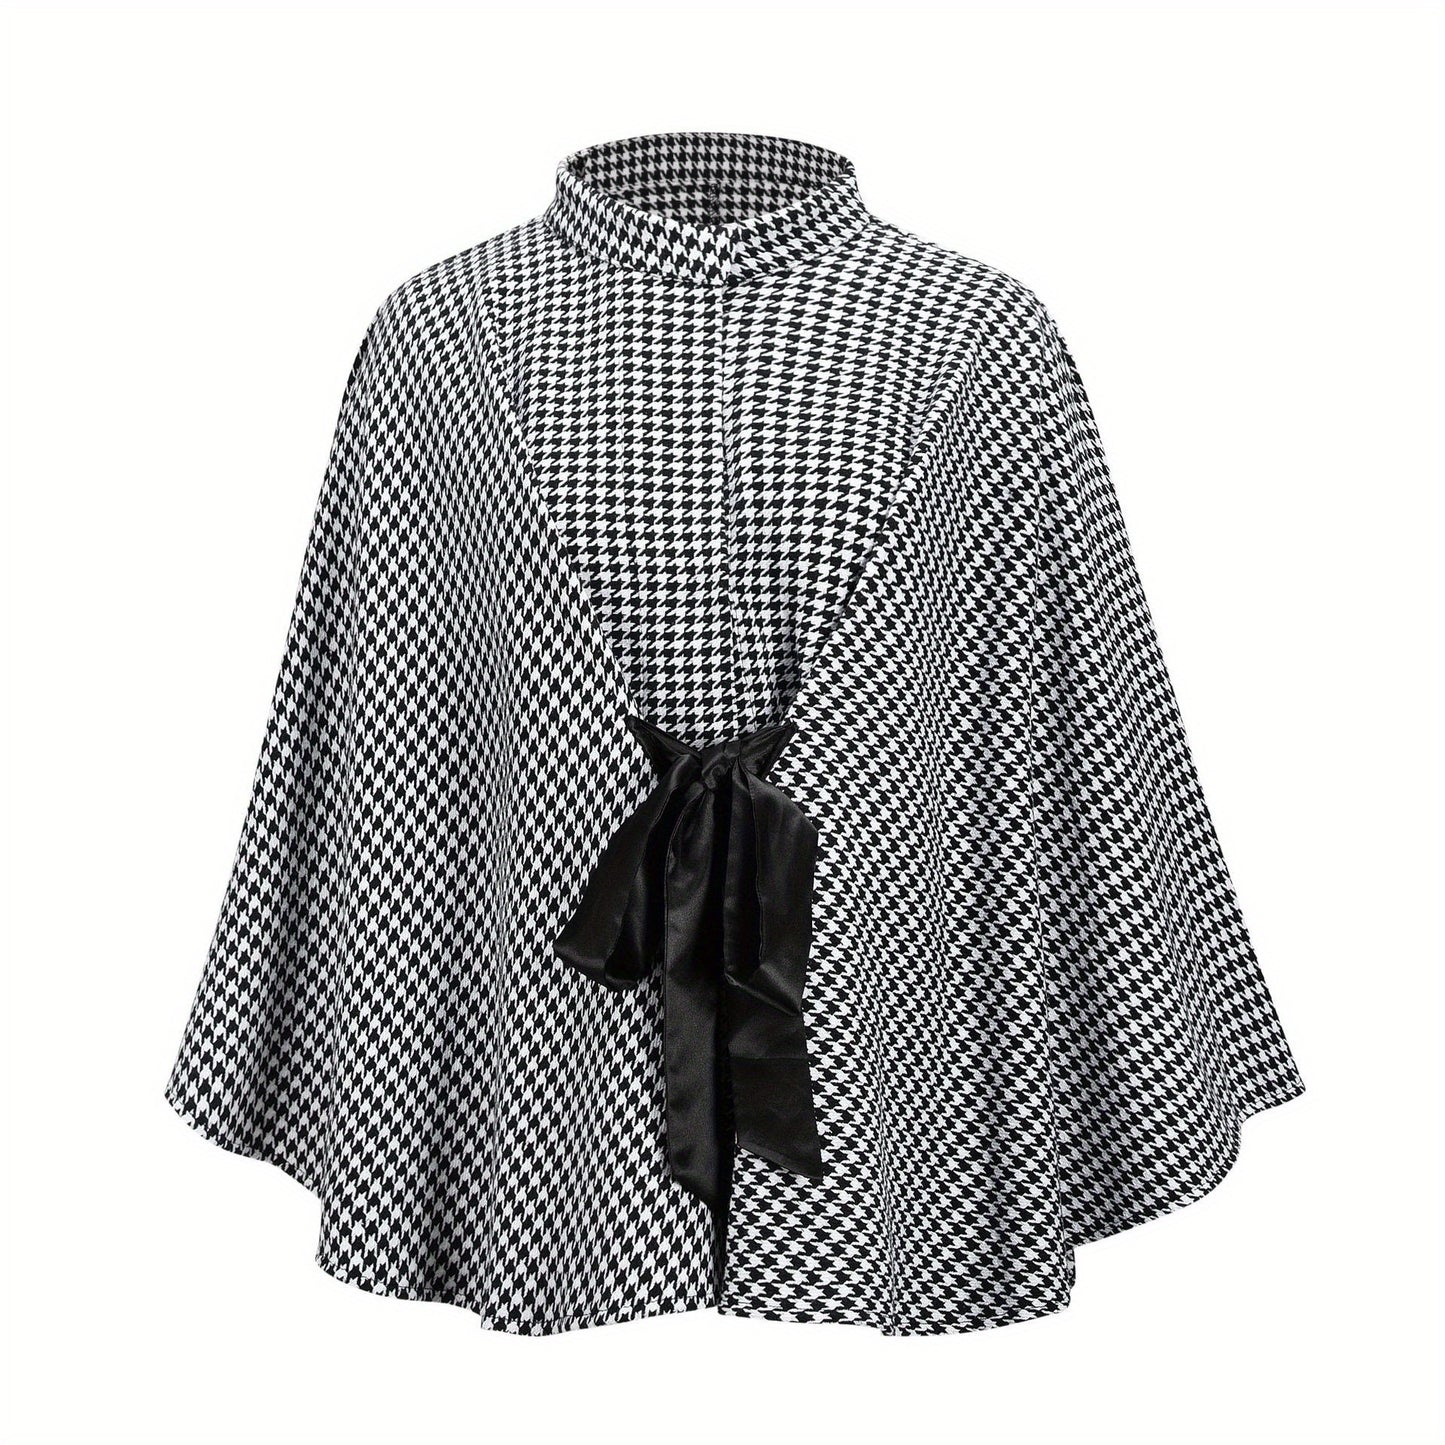 Vzyzv Houndstooth Print Cape Top, Casual Tie Front Loose Outerwear, Women's Clothing